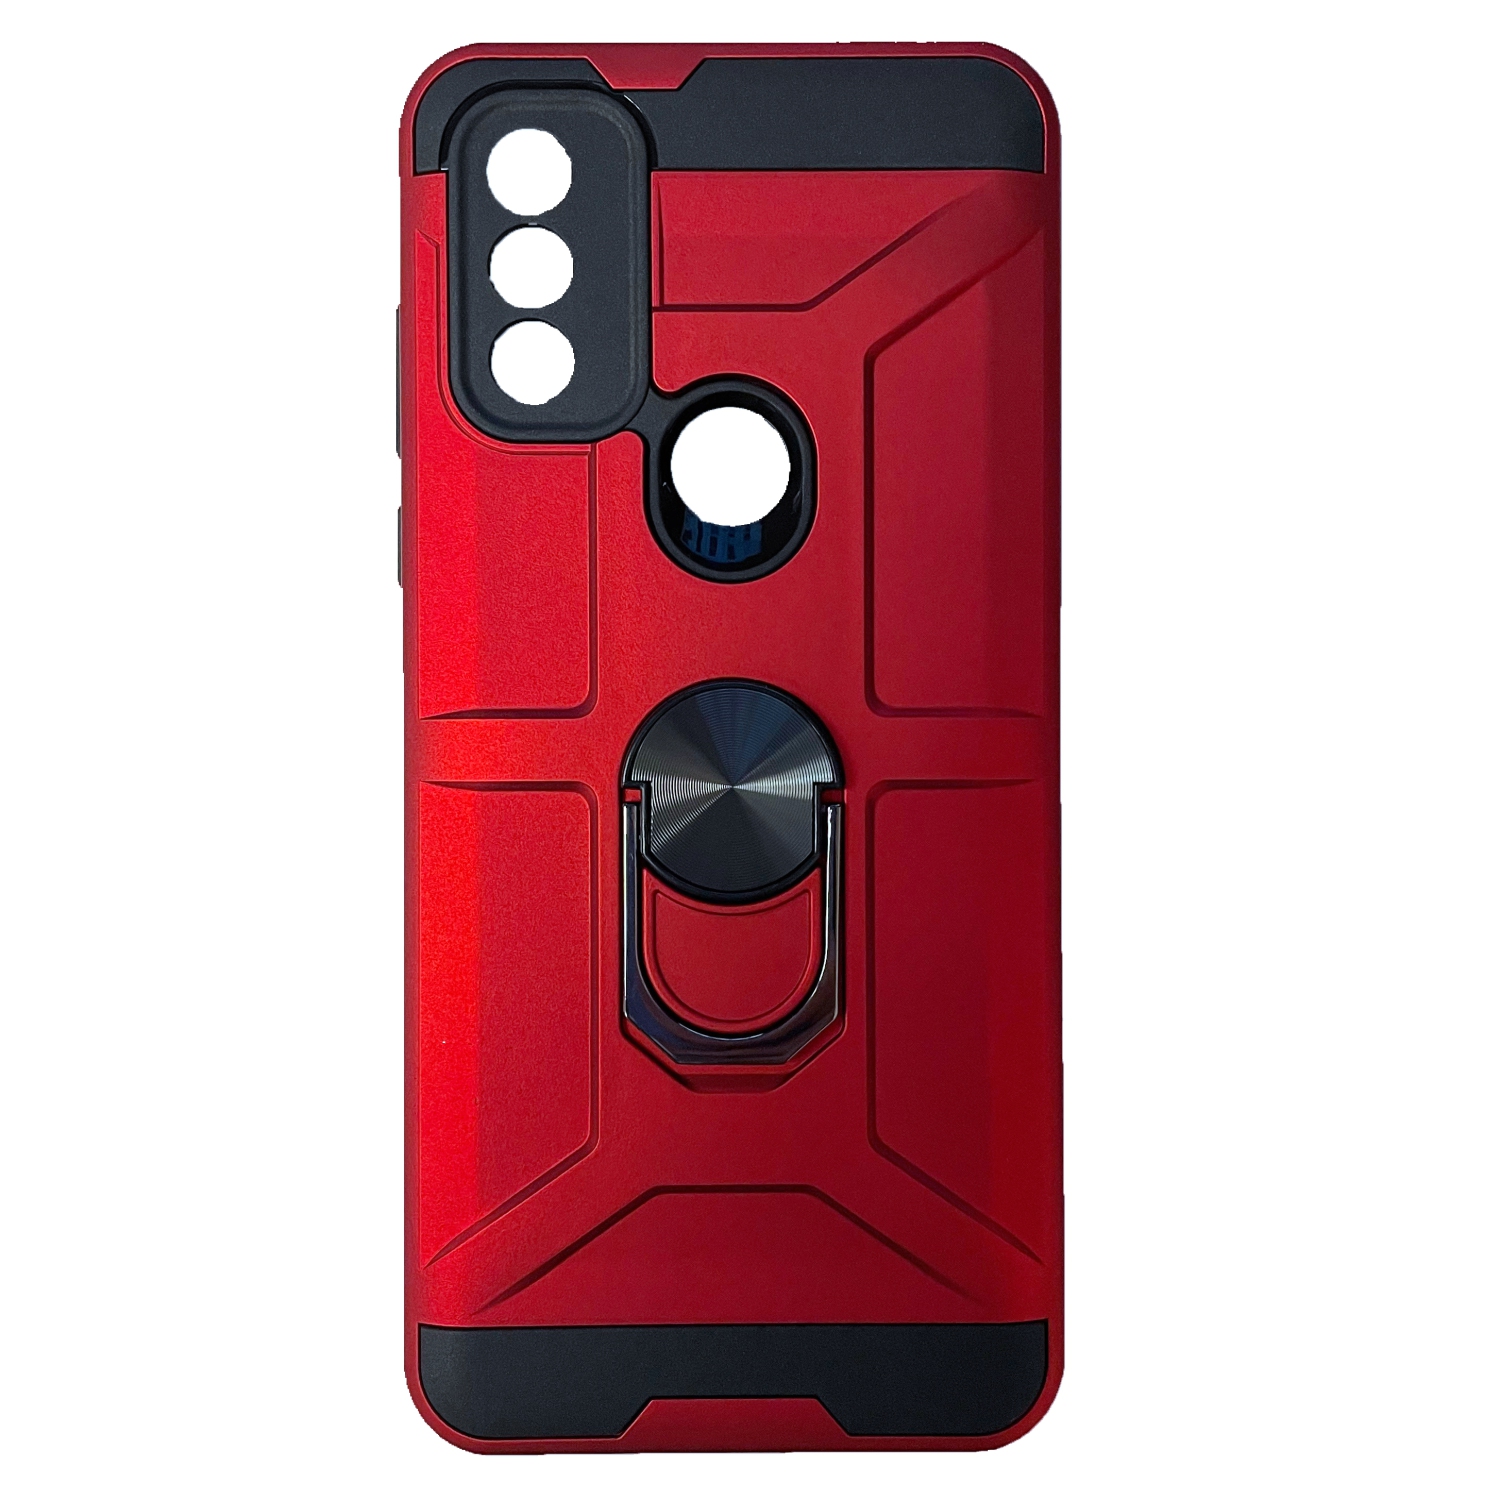 TopSave Dual Layer Hybrid Cover Case w/360 Degrees Rotating Ring Stand For Motorola Moto G Pure 6.5", Red